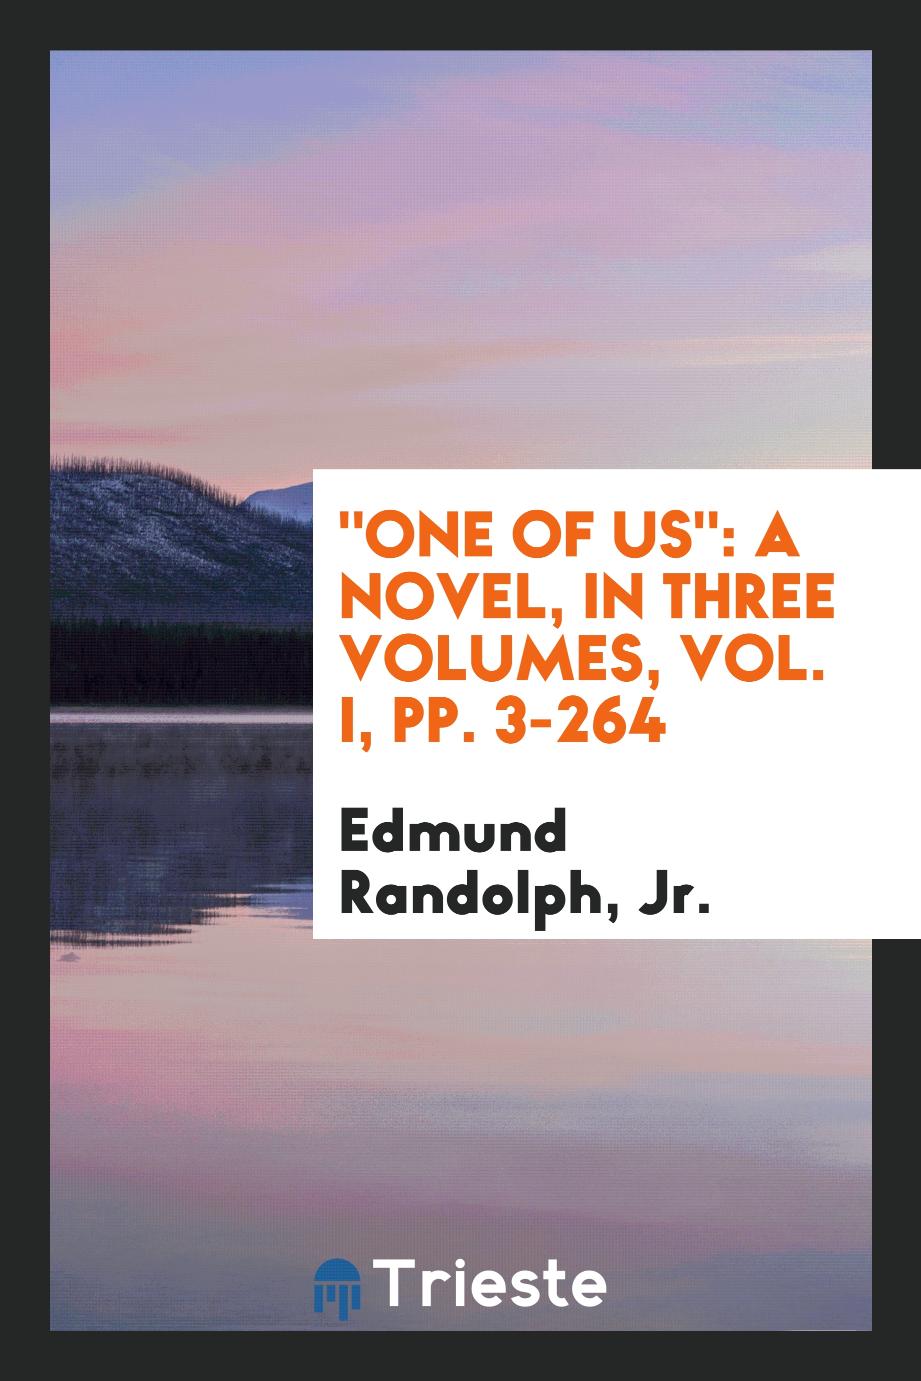 "One of Us": A Novel, in Three Volumes, Vol. I, pp. 3-264